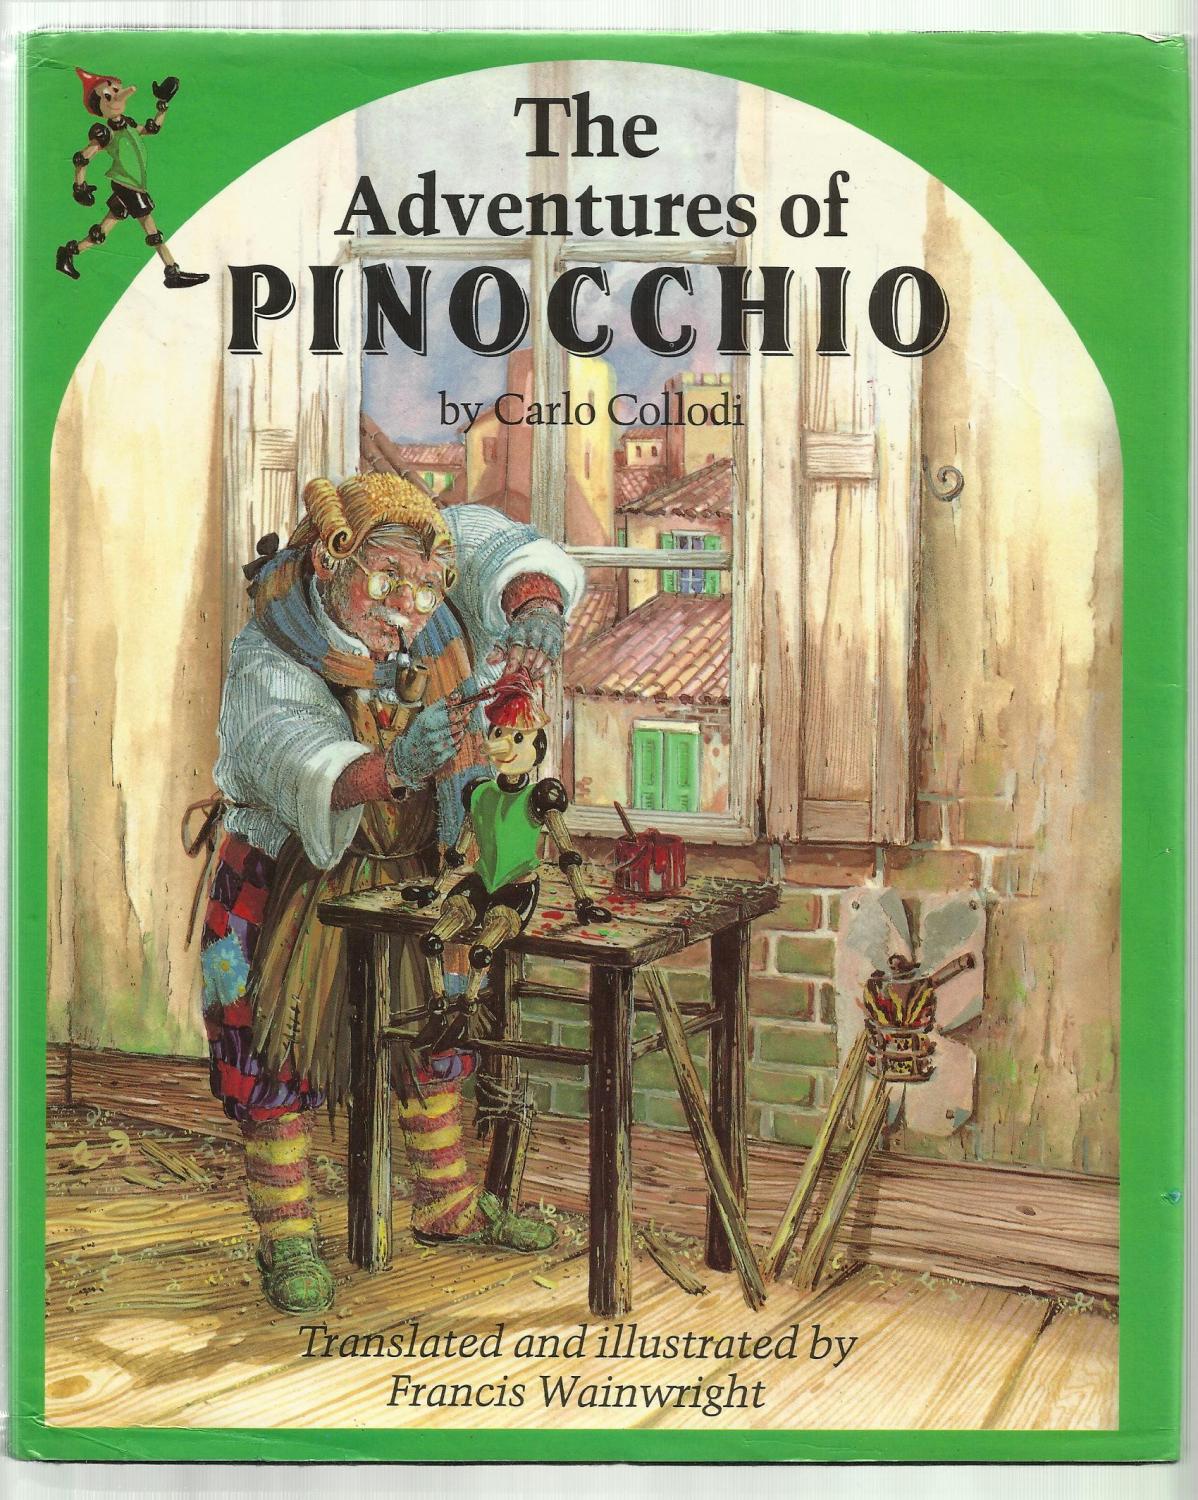 THE ADVENTURES OF PINOCCHIO - Carlo Collodi (Translated and Illustrated by Francis Wainwright)